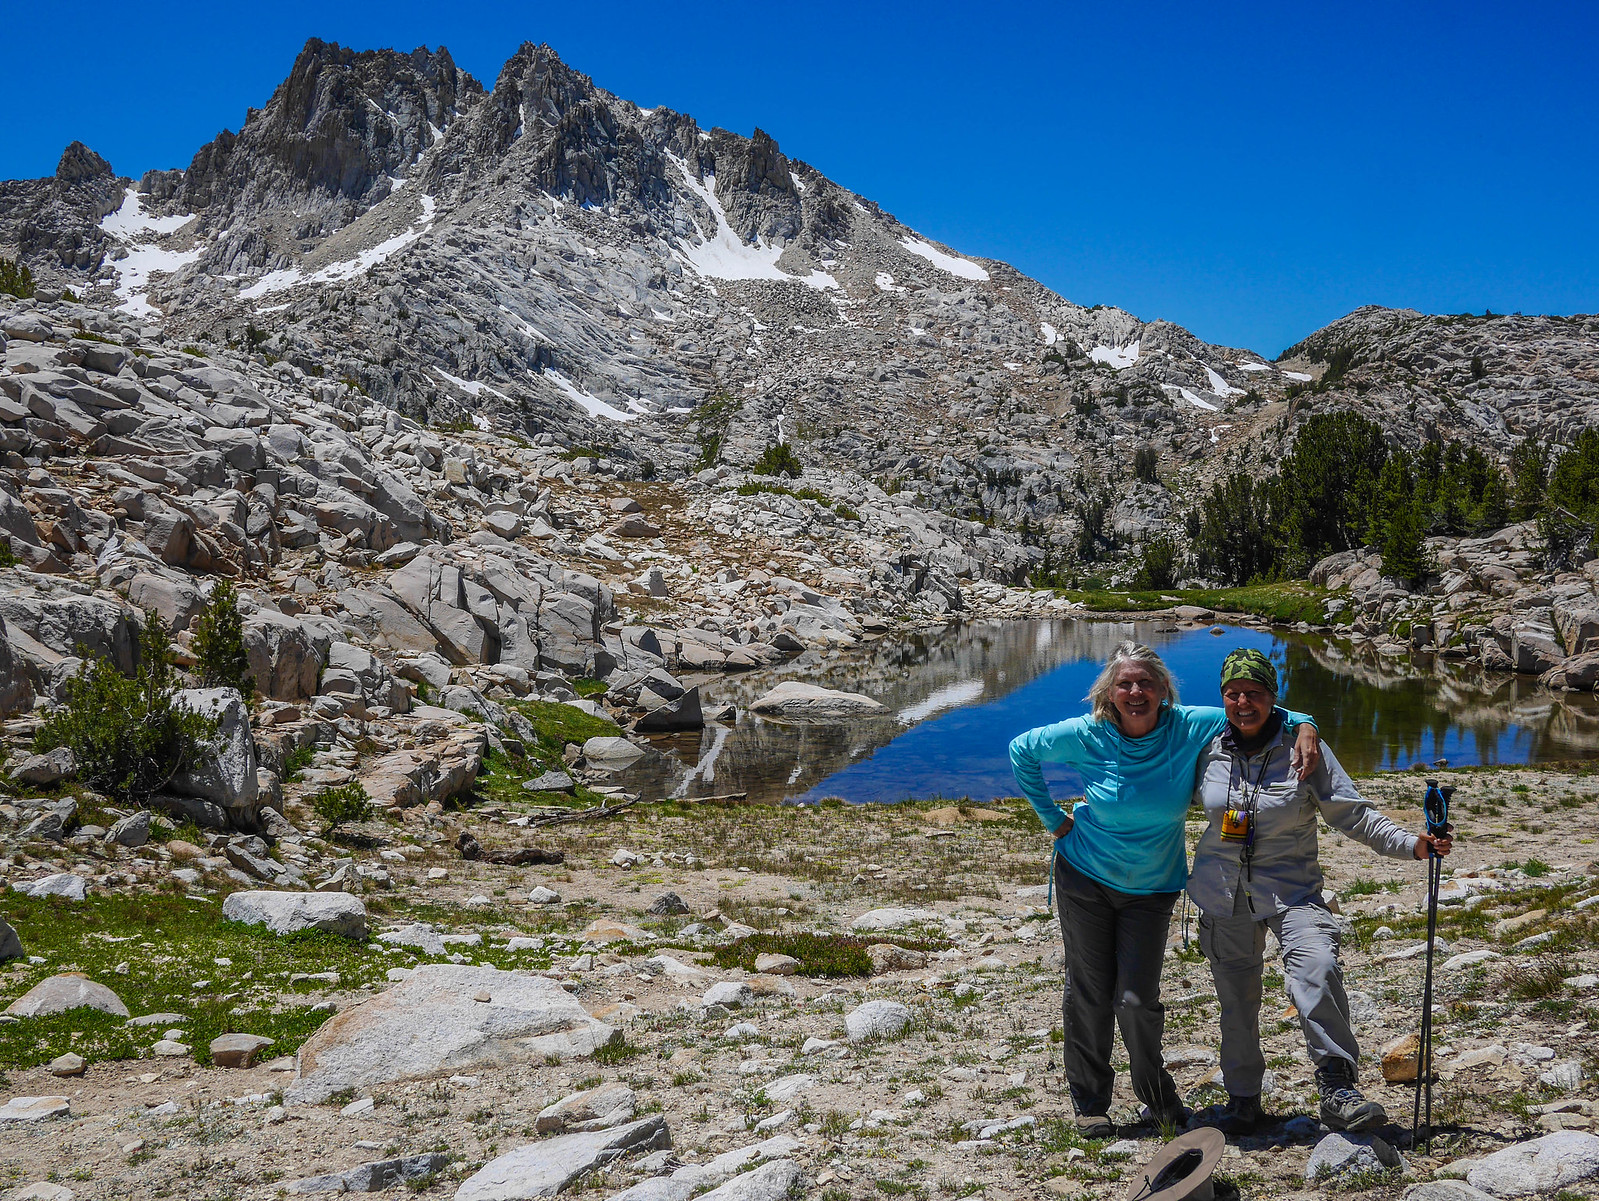 I gave these lovely women $20 so they could make their trip better by heading out via Reds Meadow instead of backtracking the way they'd come. We exchanged addresses and they mailed me a card and paid me back! Trail magic :)